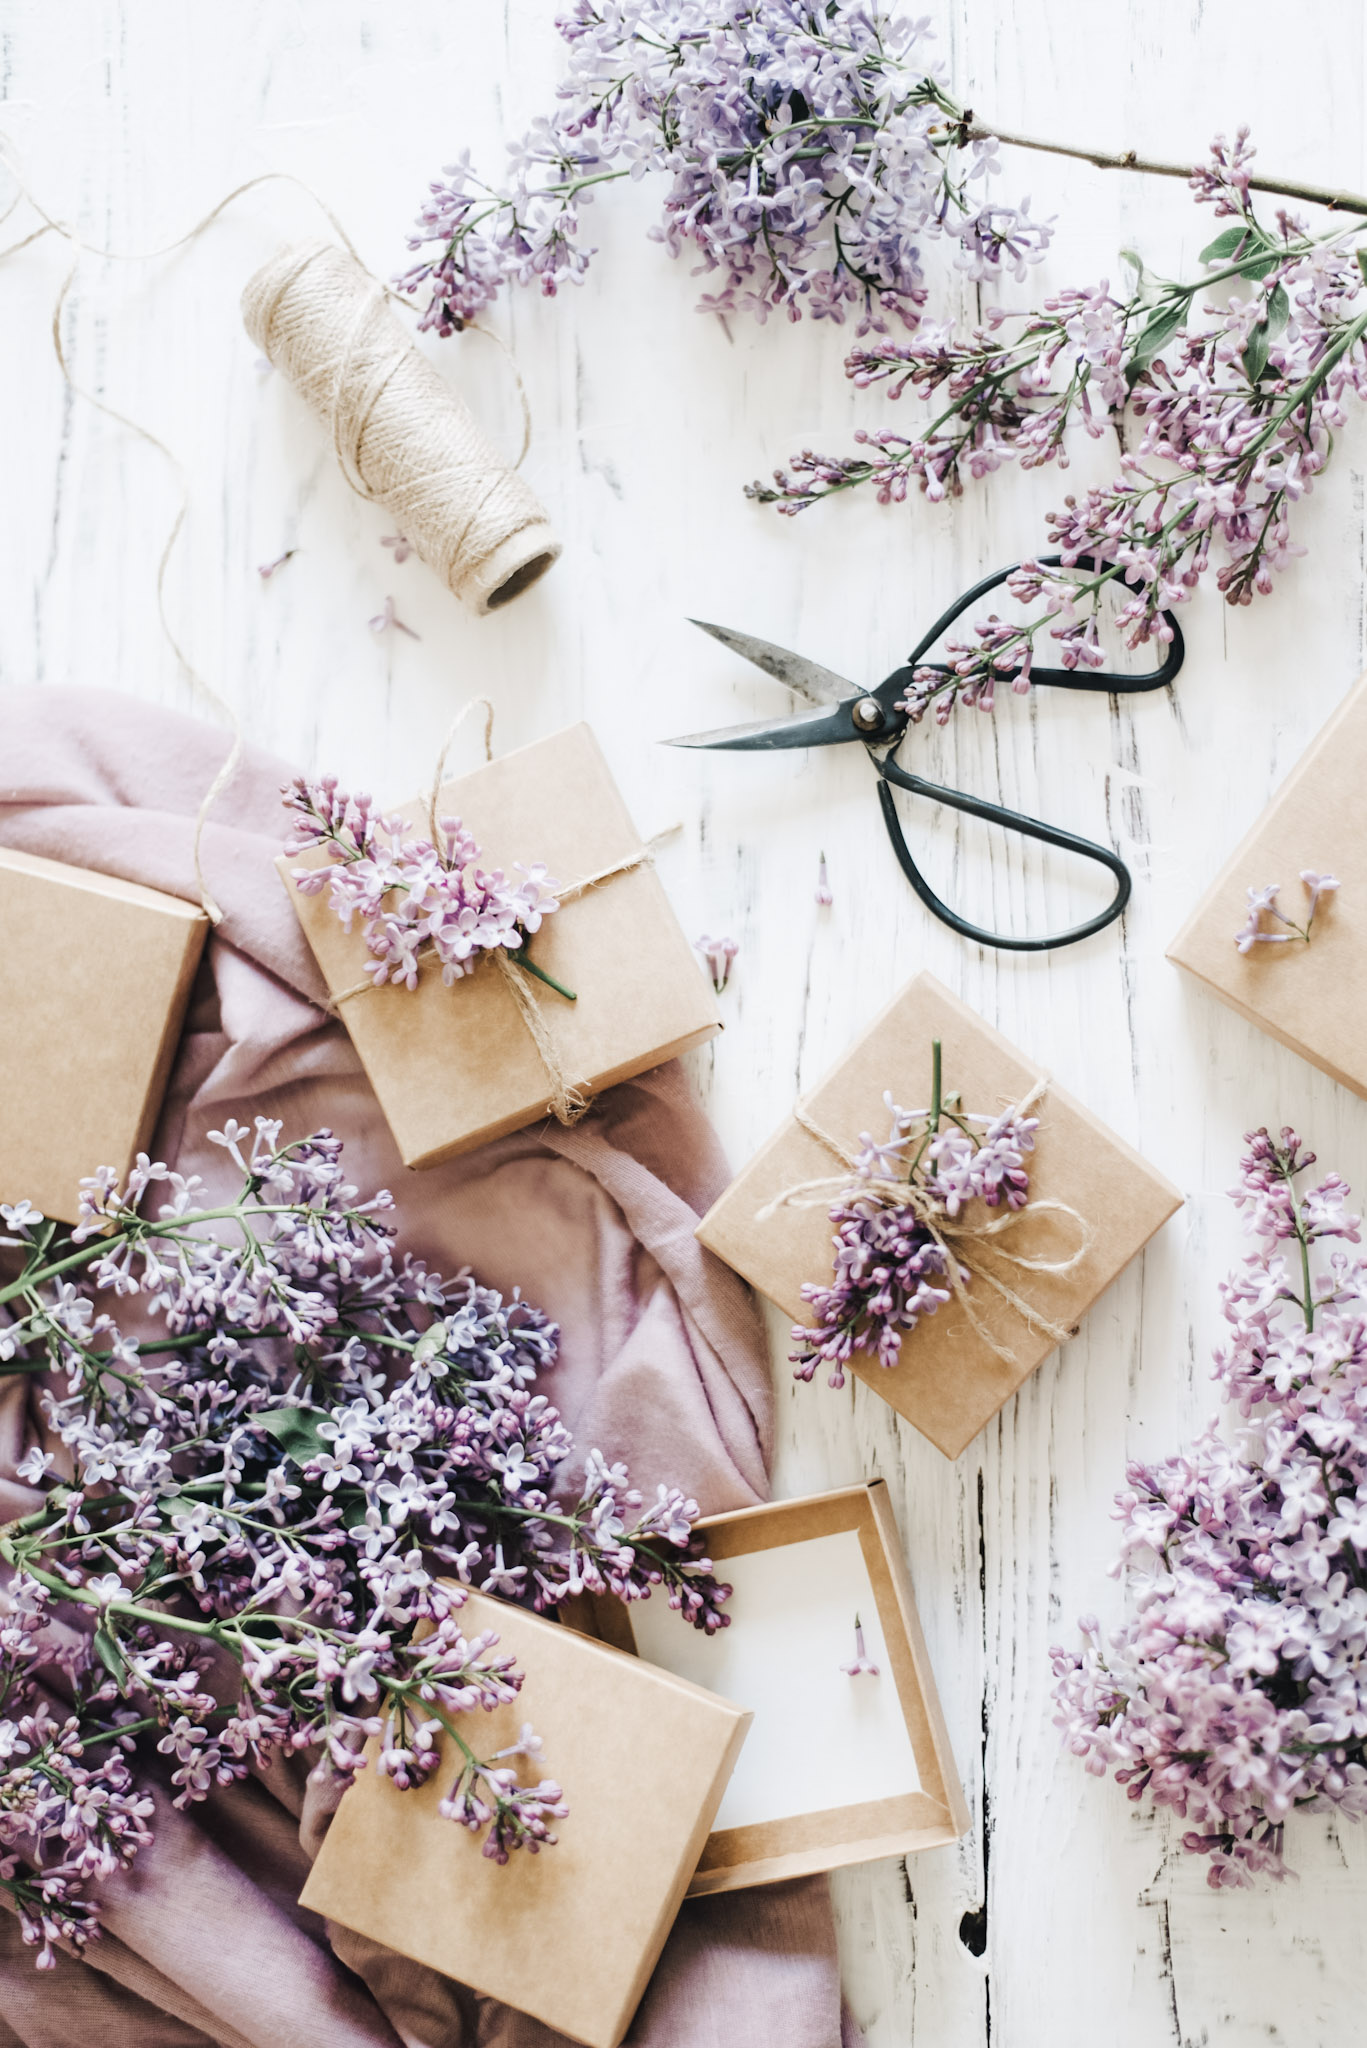 Sprigs of lavender, with scissors and string. Items used to wrap gifts. This article covers how to pick gifts that will surprise and delight.